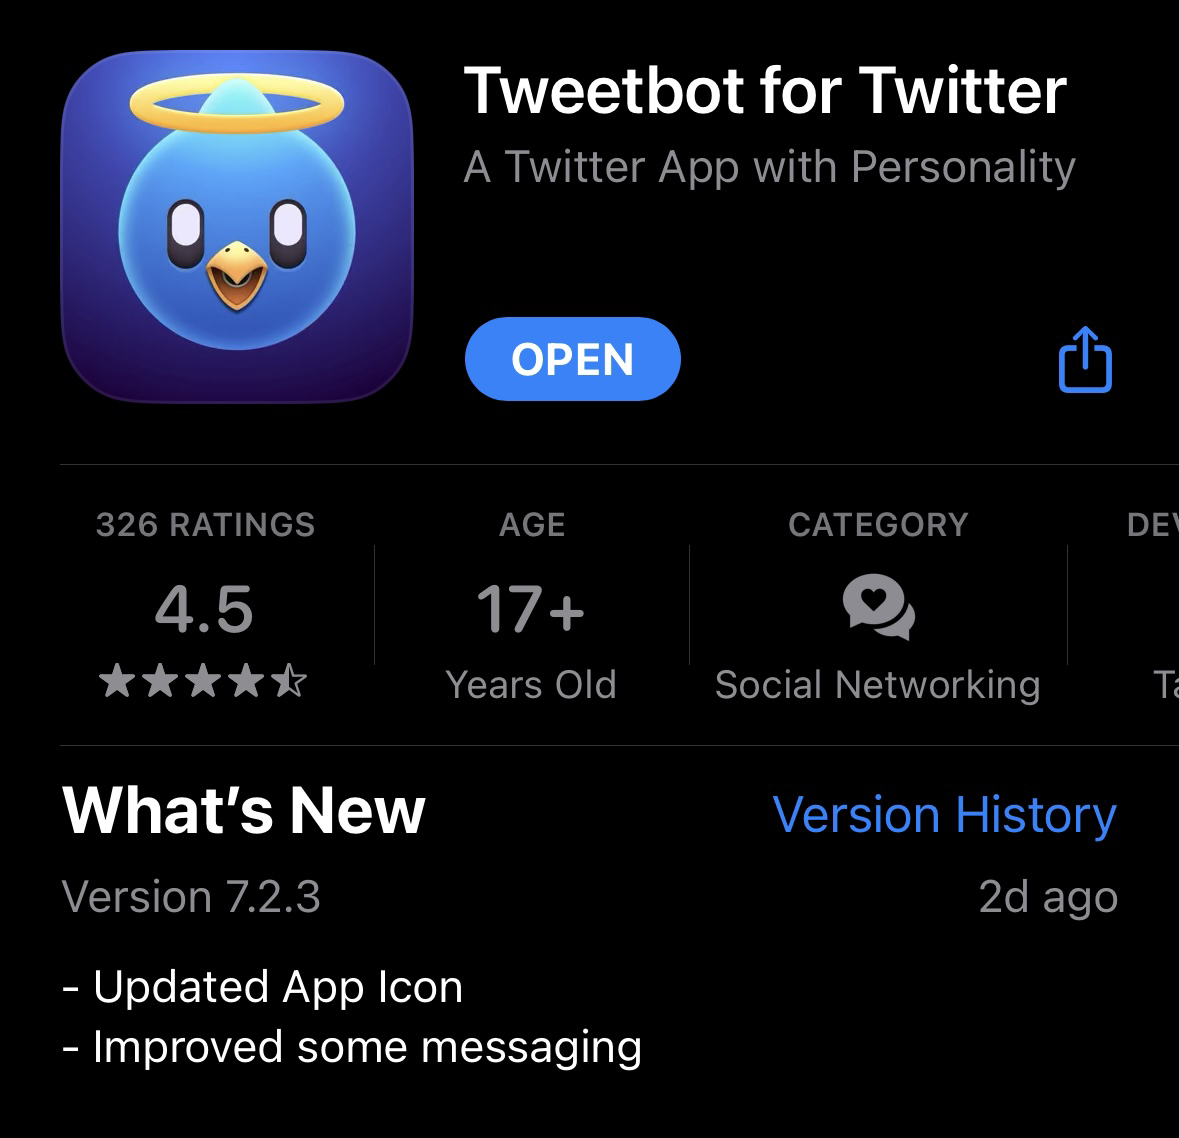 Apple Store app update page for the twitter app, Tweetbot. The blue bird that has been the icon has been updated to have a halo like an angel implying that it is dead, which the app now is.